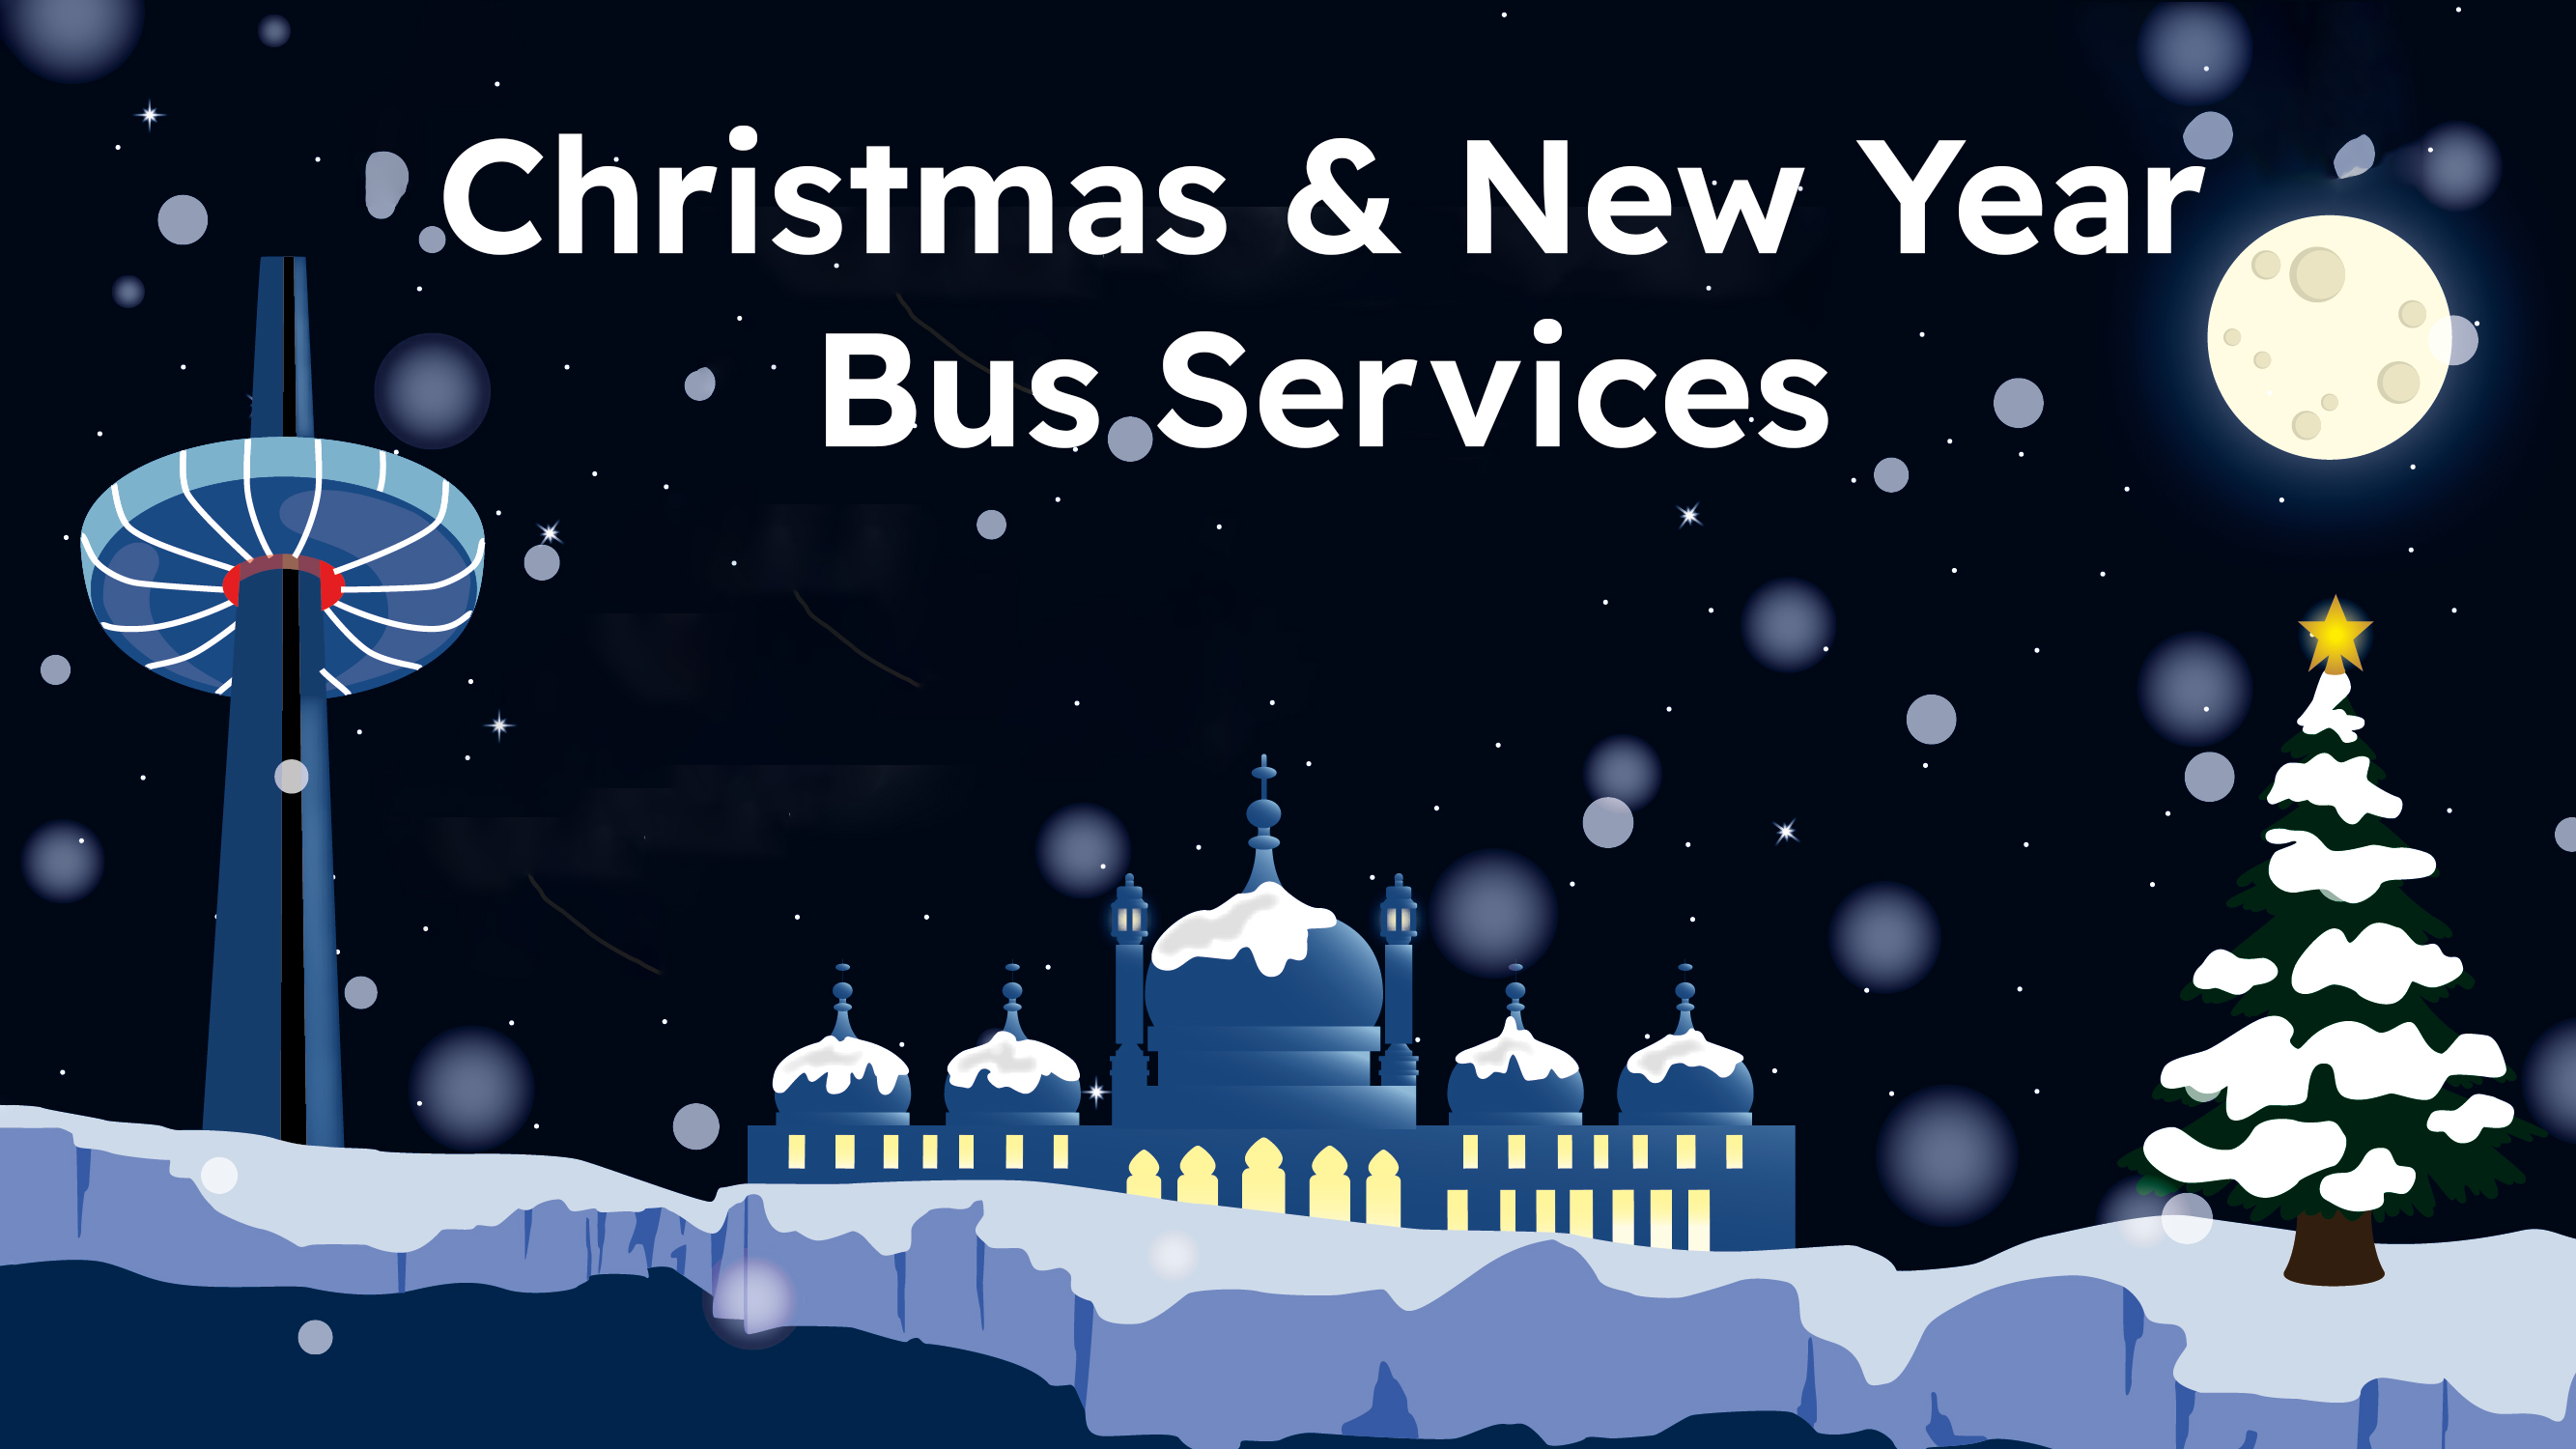 Text that reads "Christmas & New Year Bus Services" on a festive Brighton cityscape